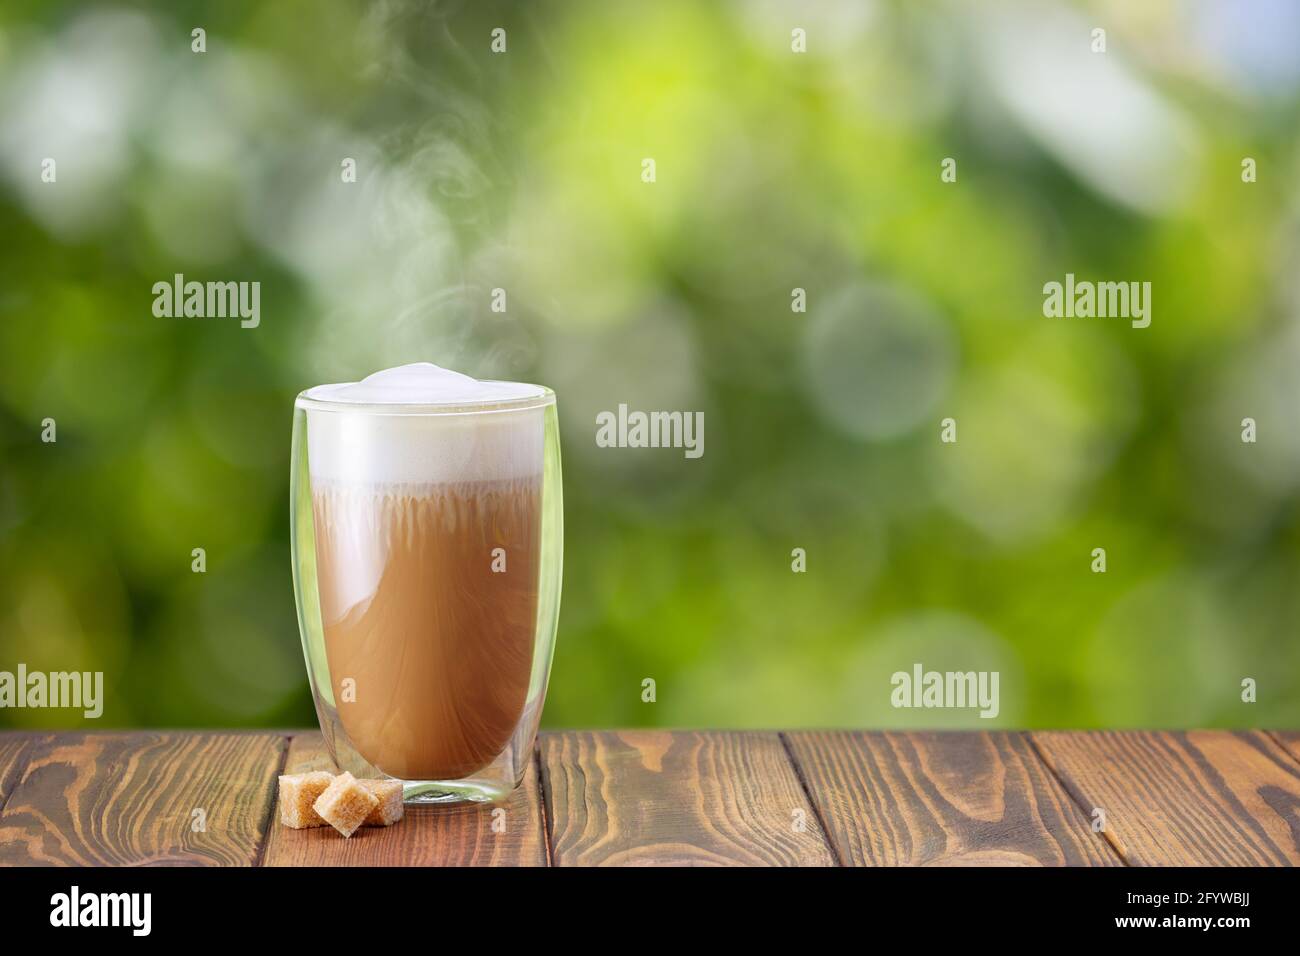 cappuccino in glass with double walls on table Stock Photo